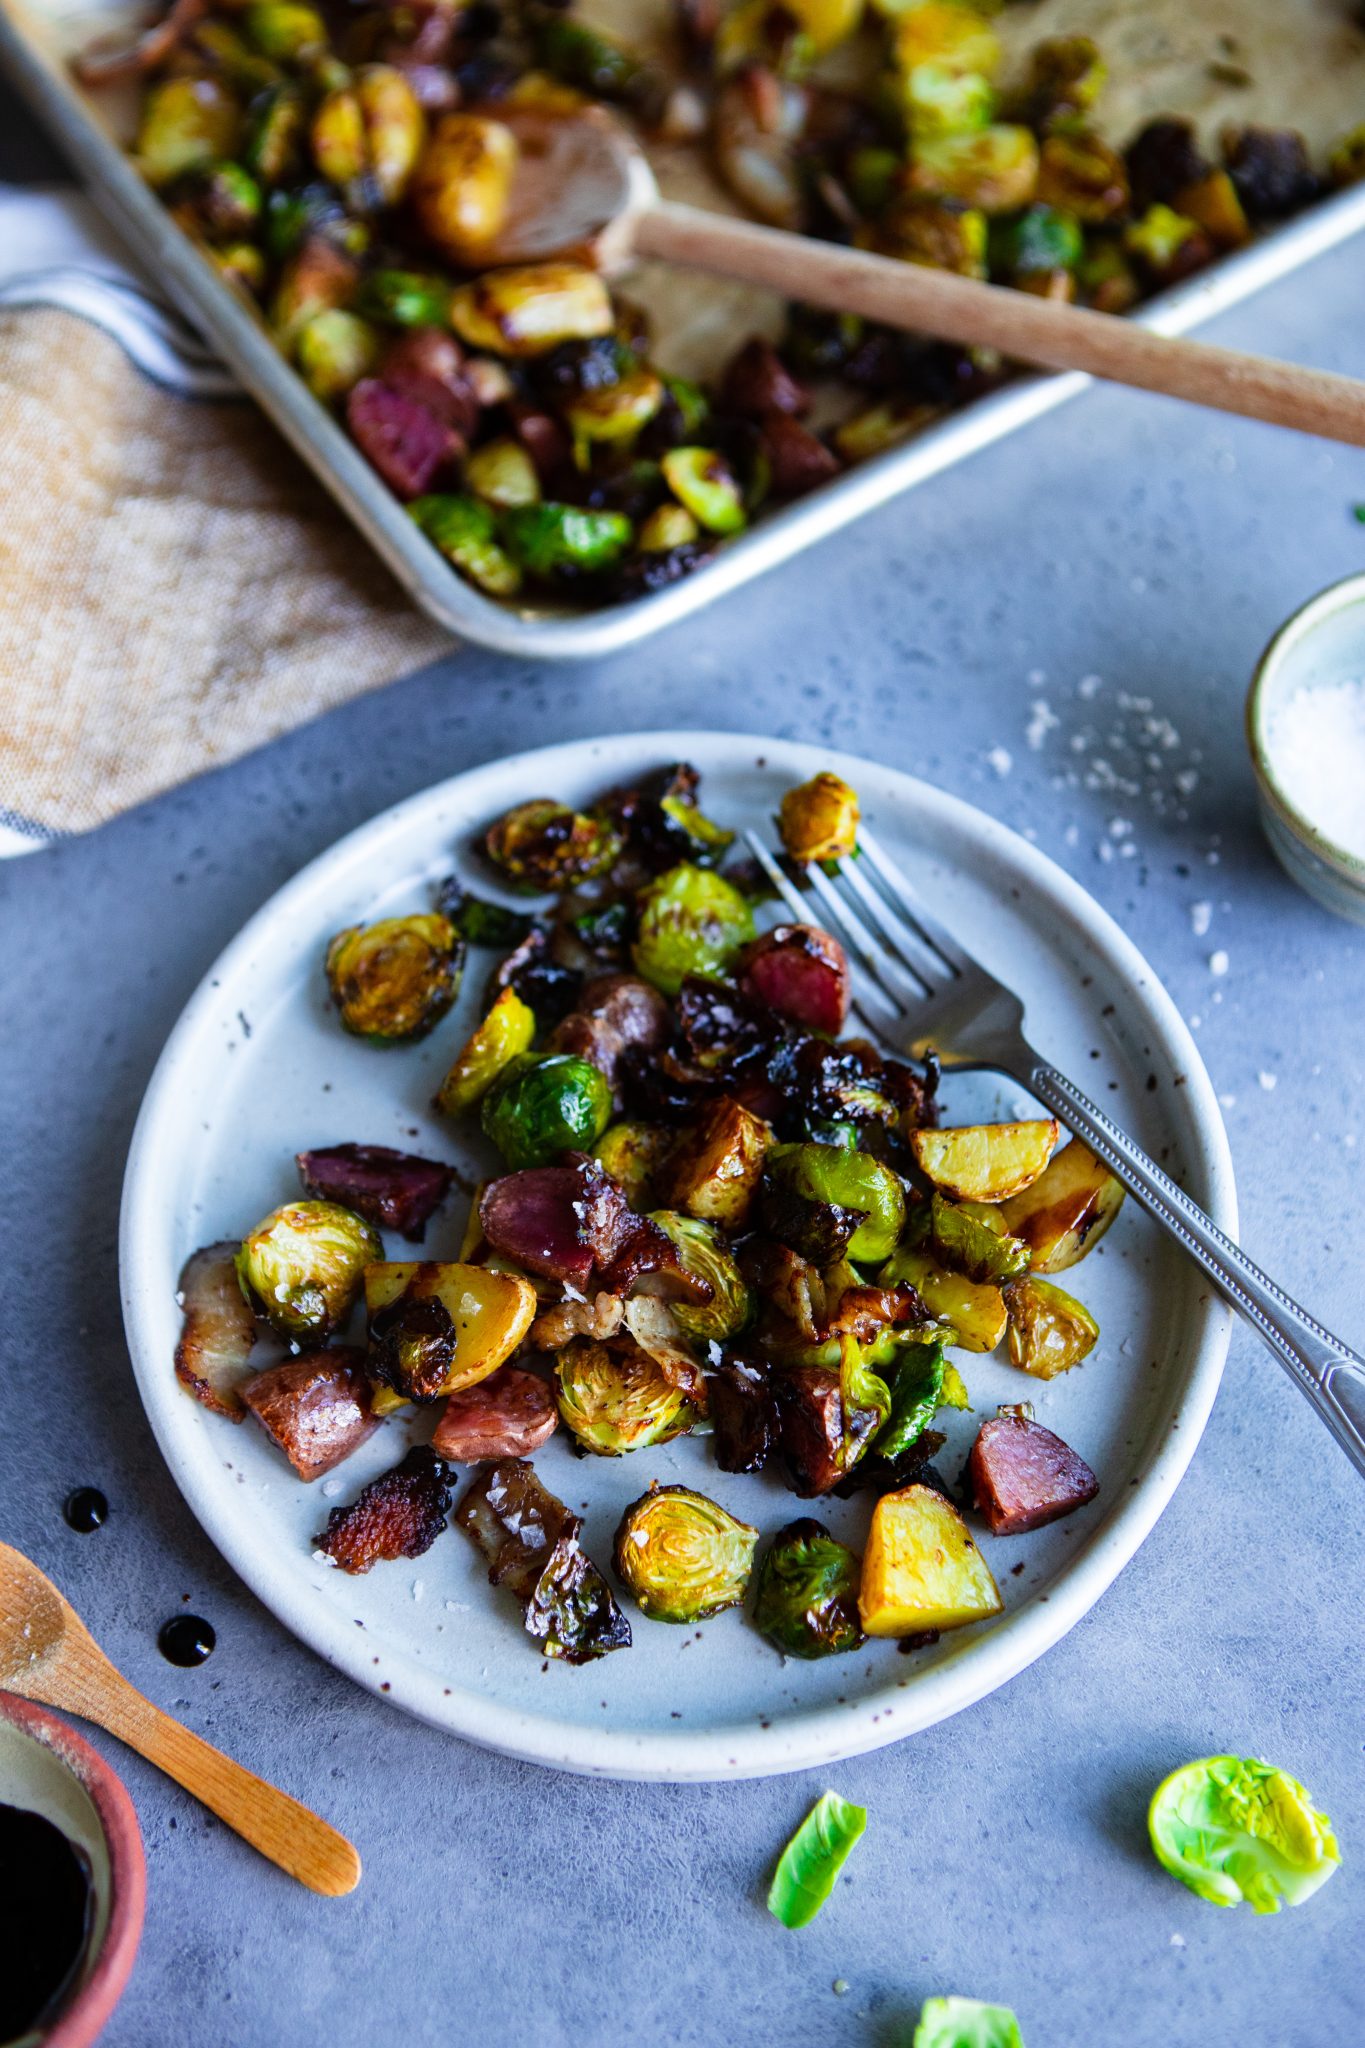 plated air fried brussels sprouts with potatoes and bacon and tossed in balsamic glaze